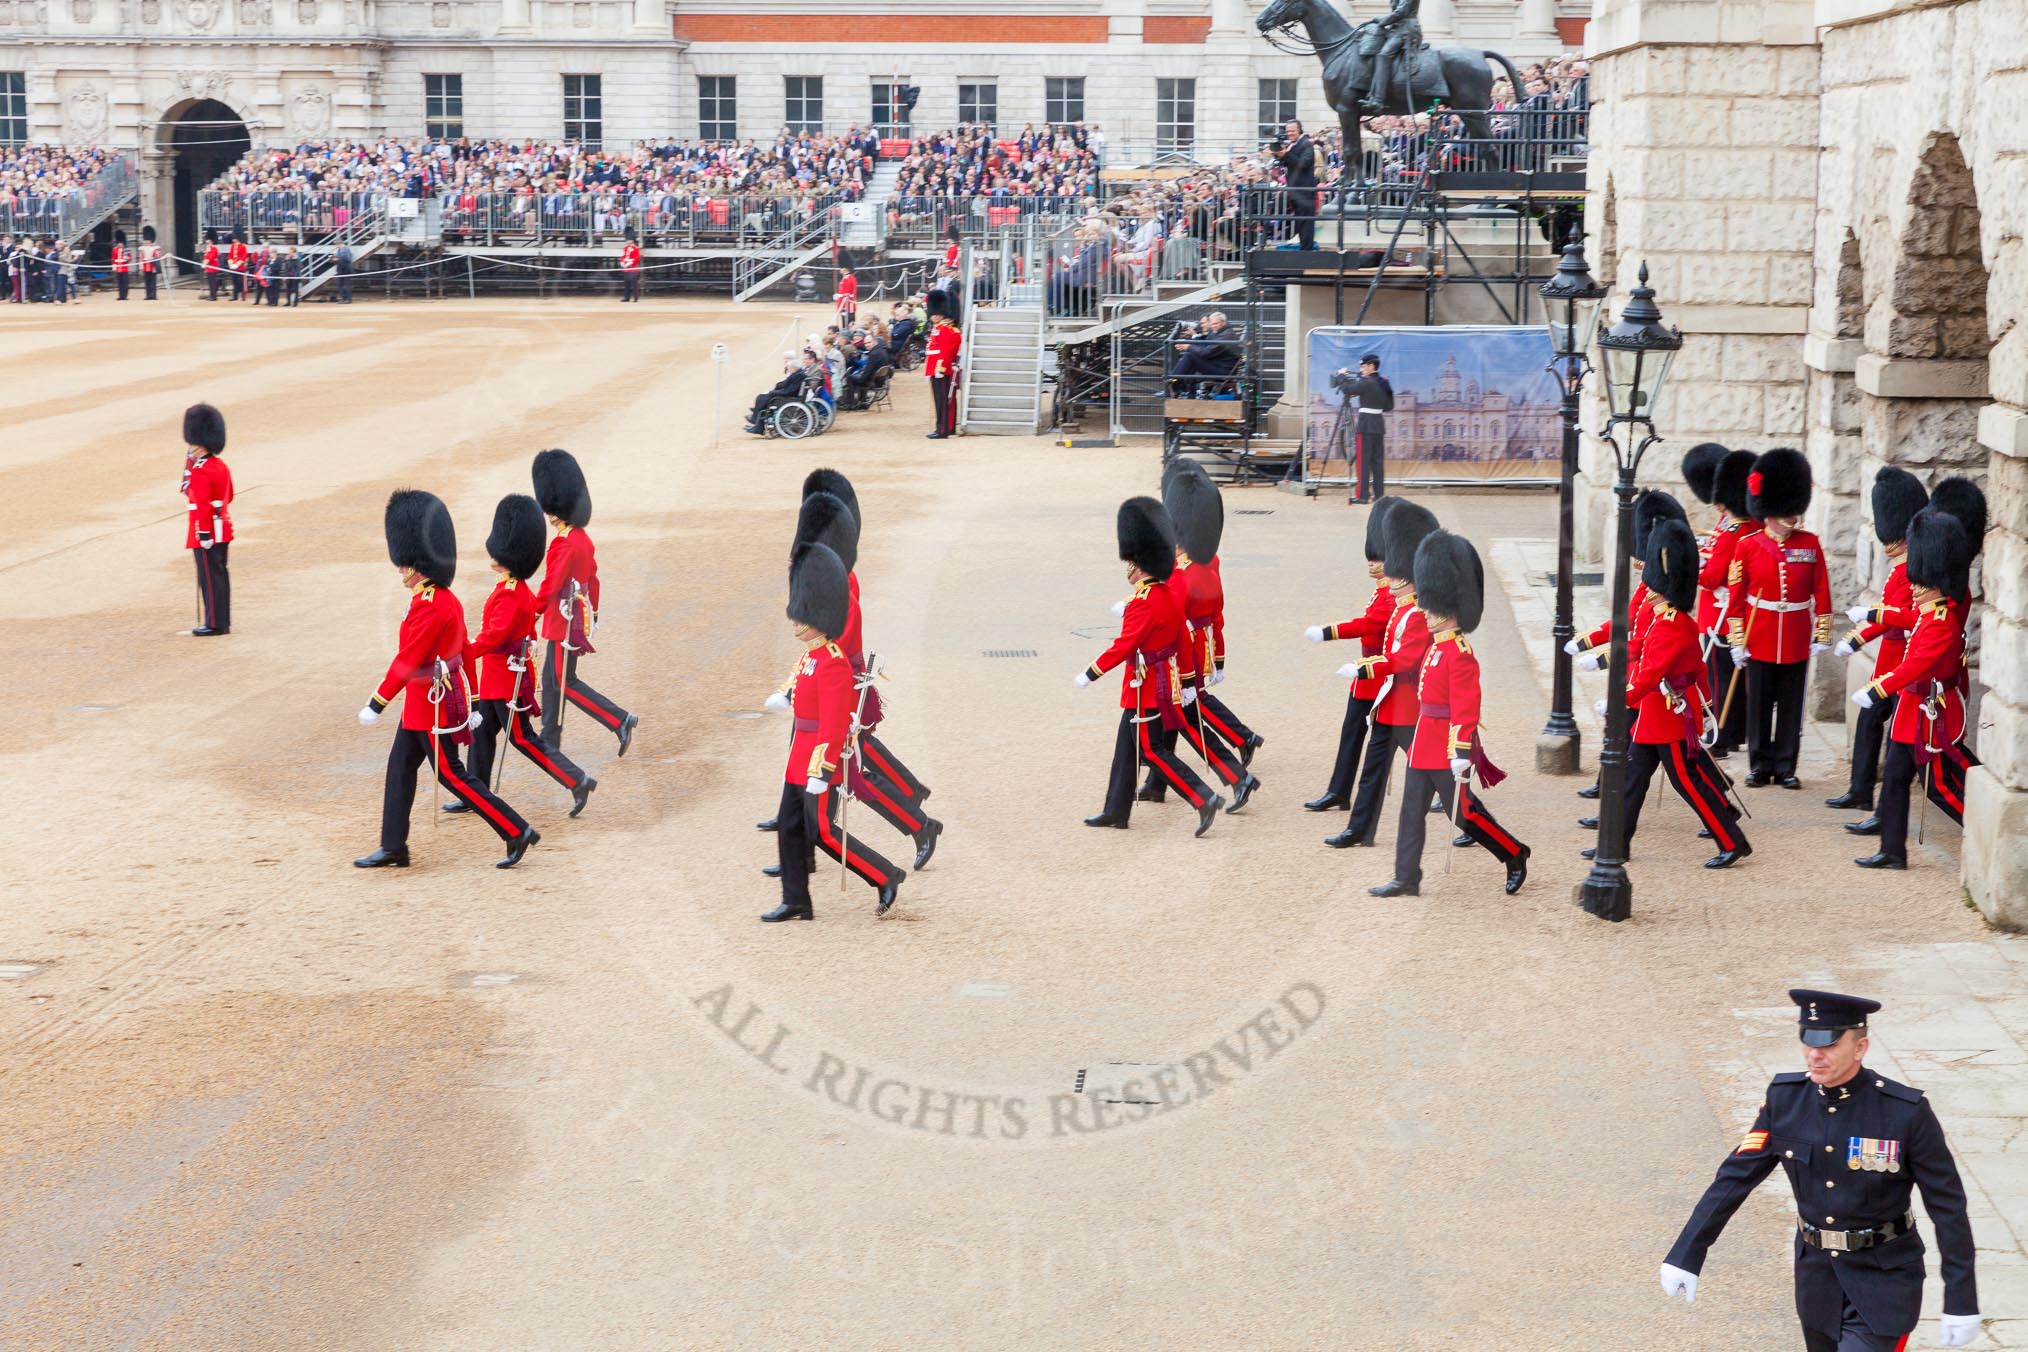 The Colonel's Review 2016.
Horse Guards Parade, Westminster,
London,

United Kingdom,
on 04 June 2016 at 10:37, image #106